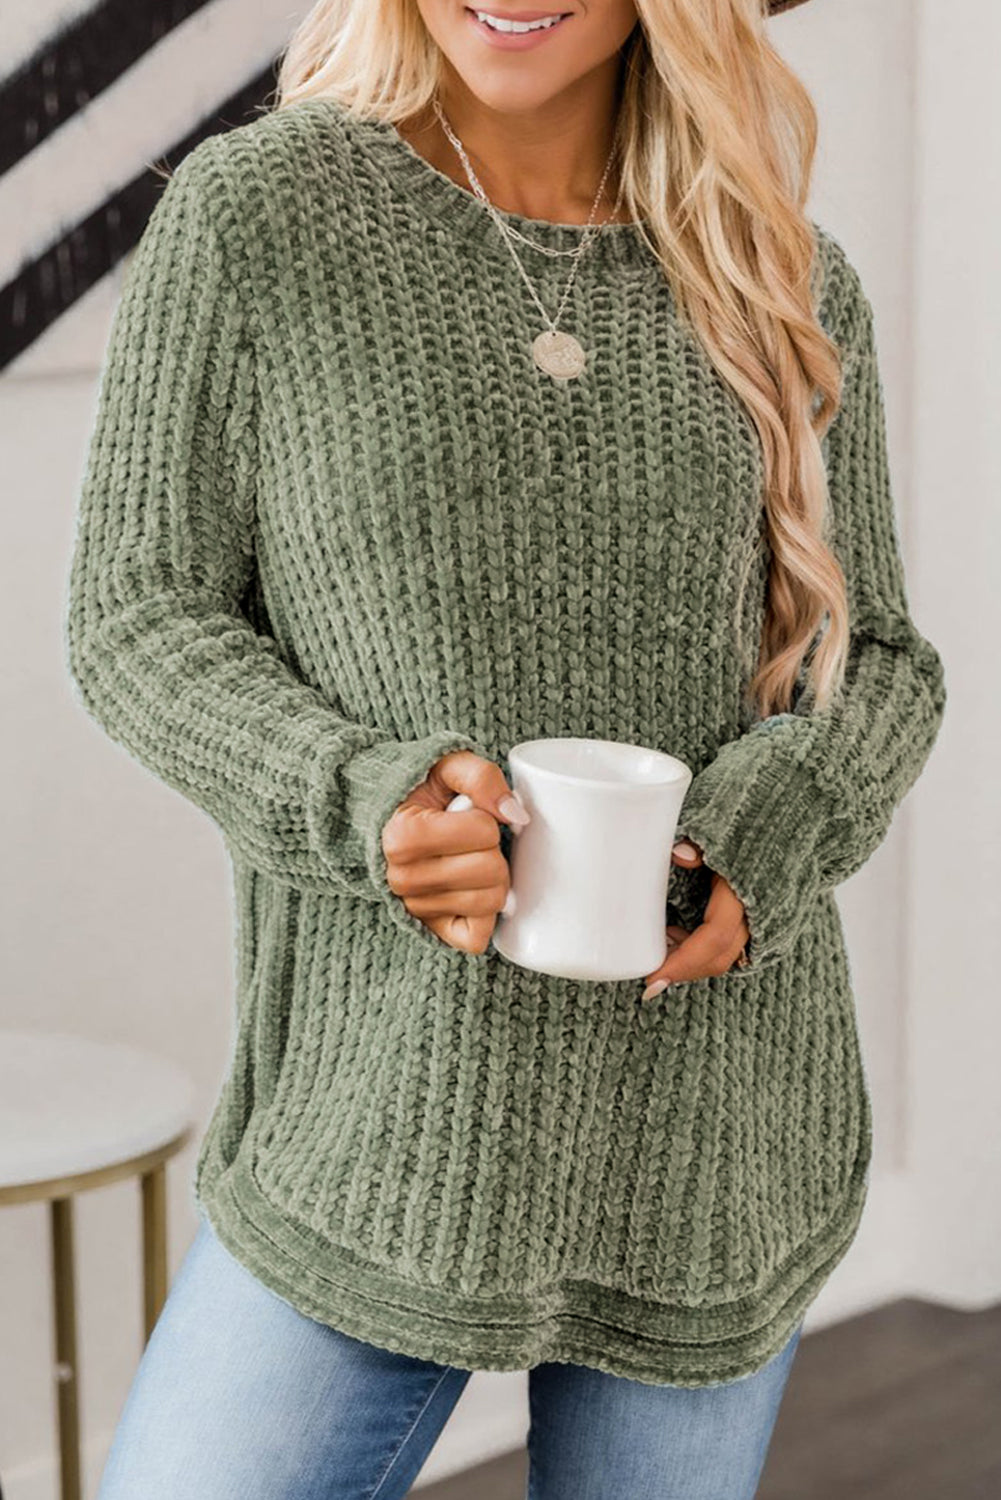 Cali Chic Green Long Sleeve Round Hem Cable Knit Sweater